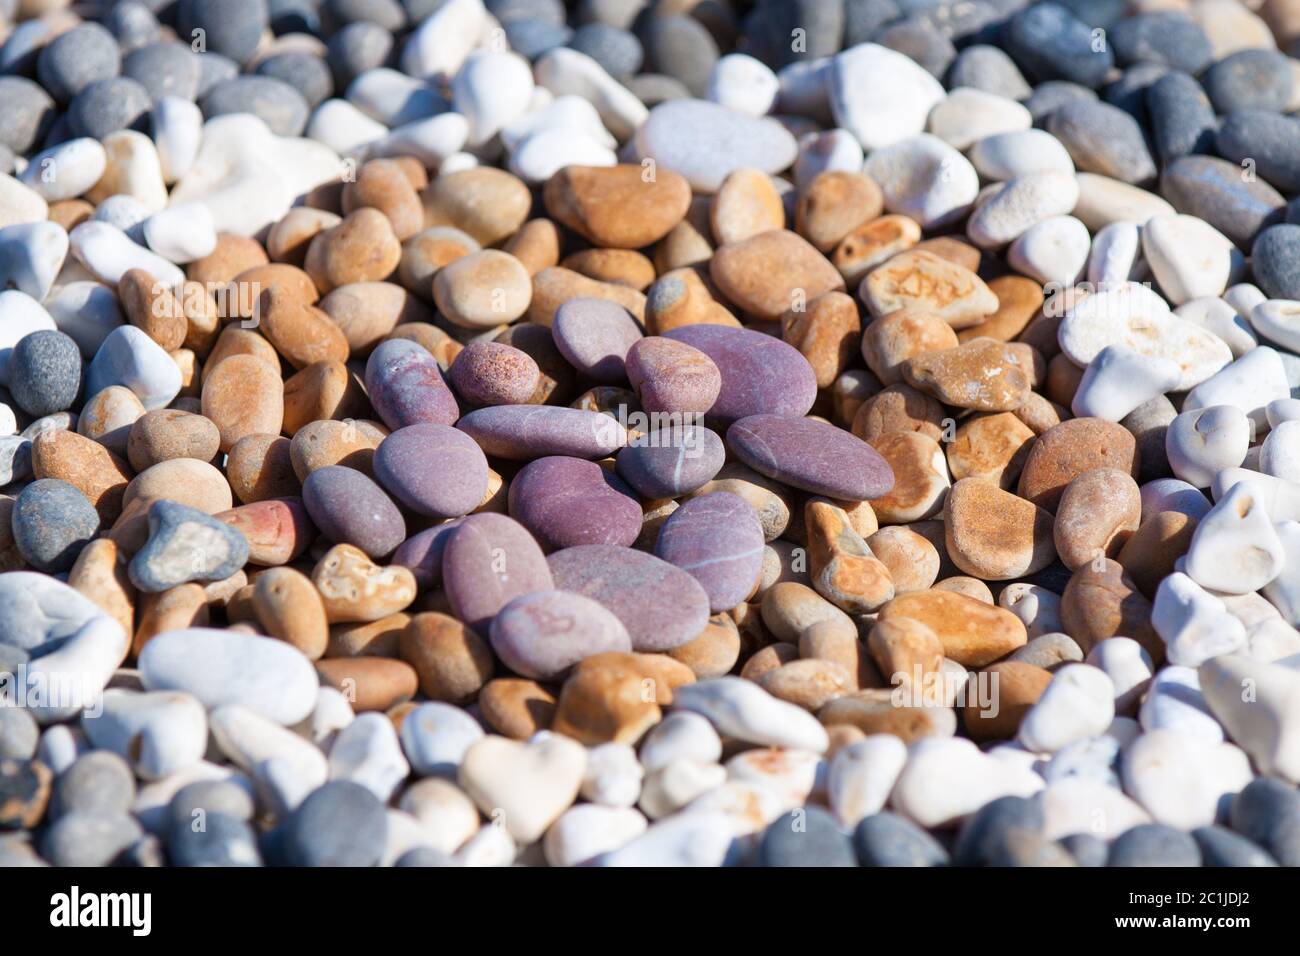 Chesil Beach, Dorset - Colourful beach pebbles arranged into concentric circles for fun and relaxation on a summertime day trip to the seaside. Stock Photo